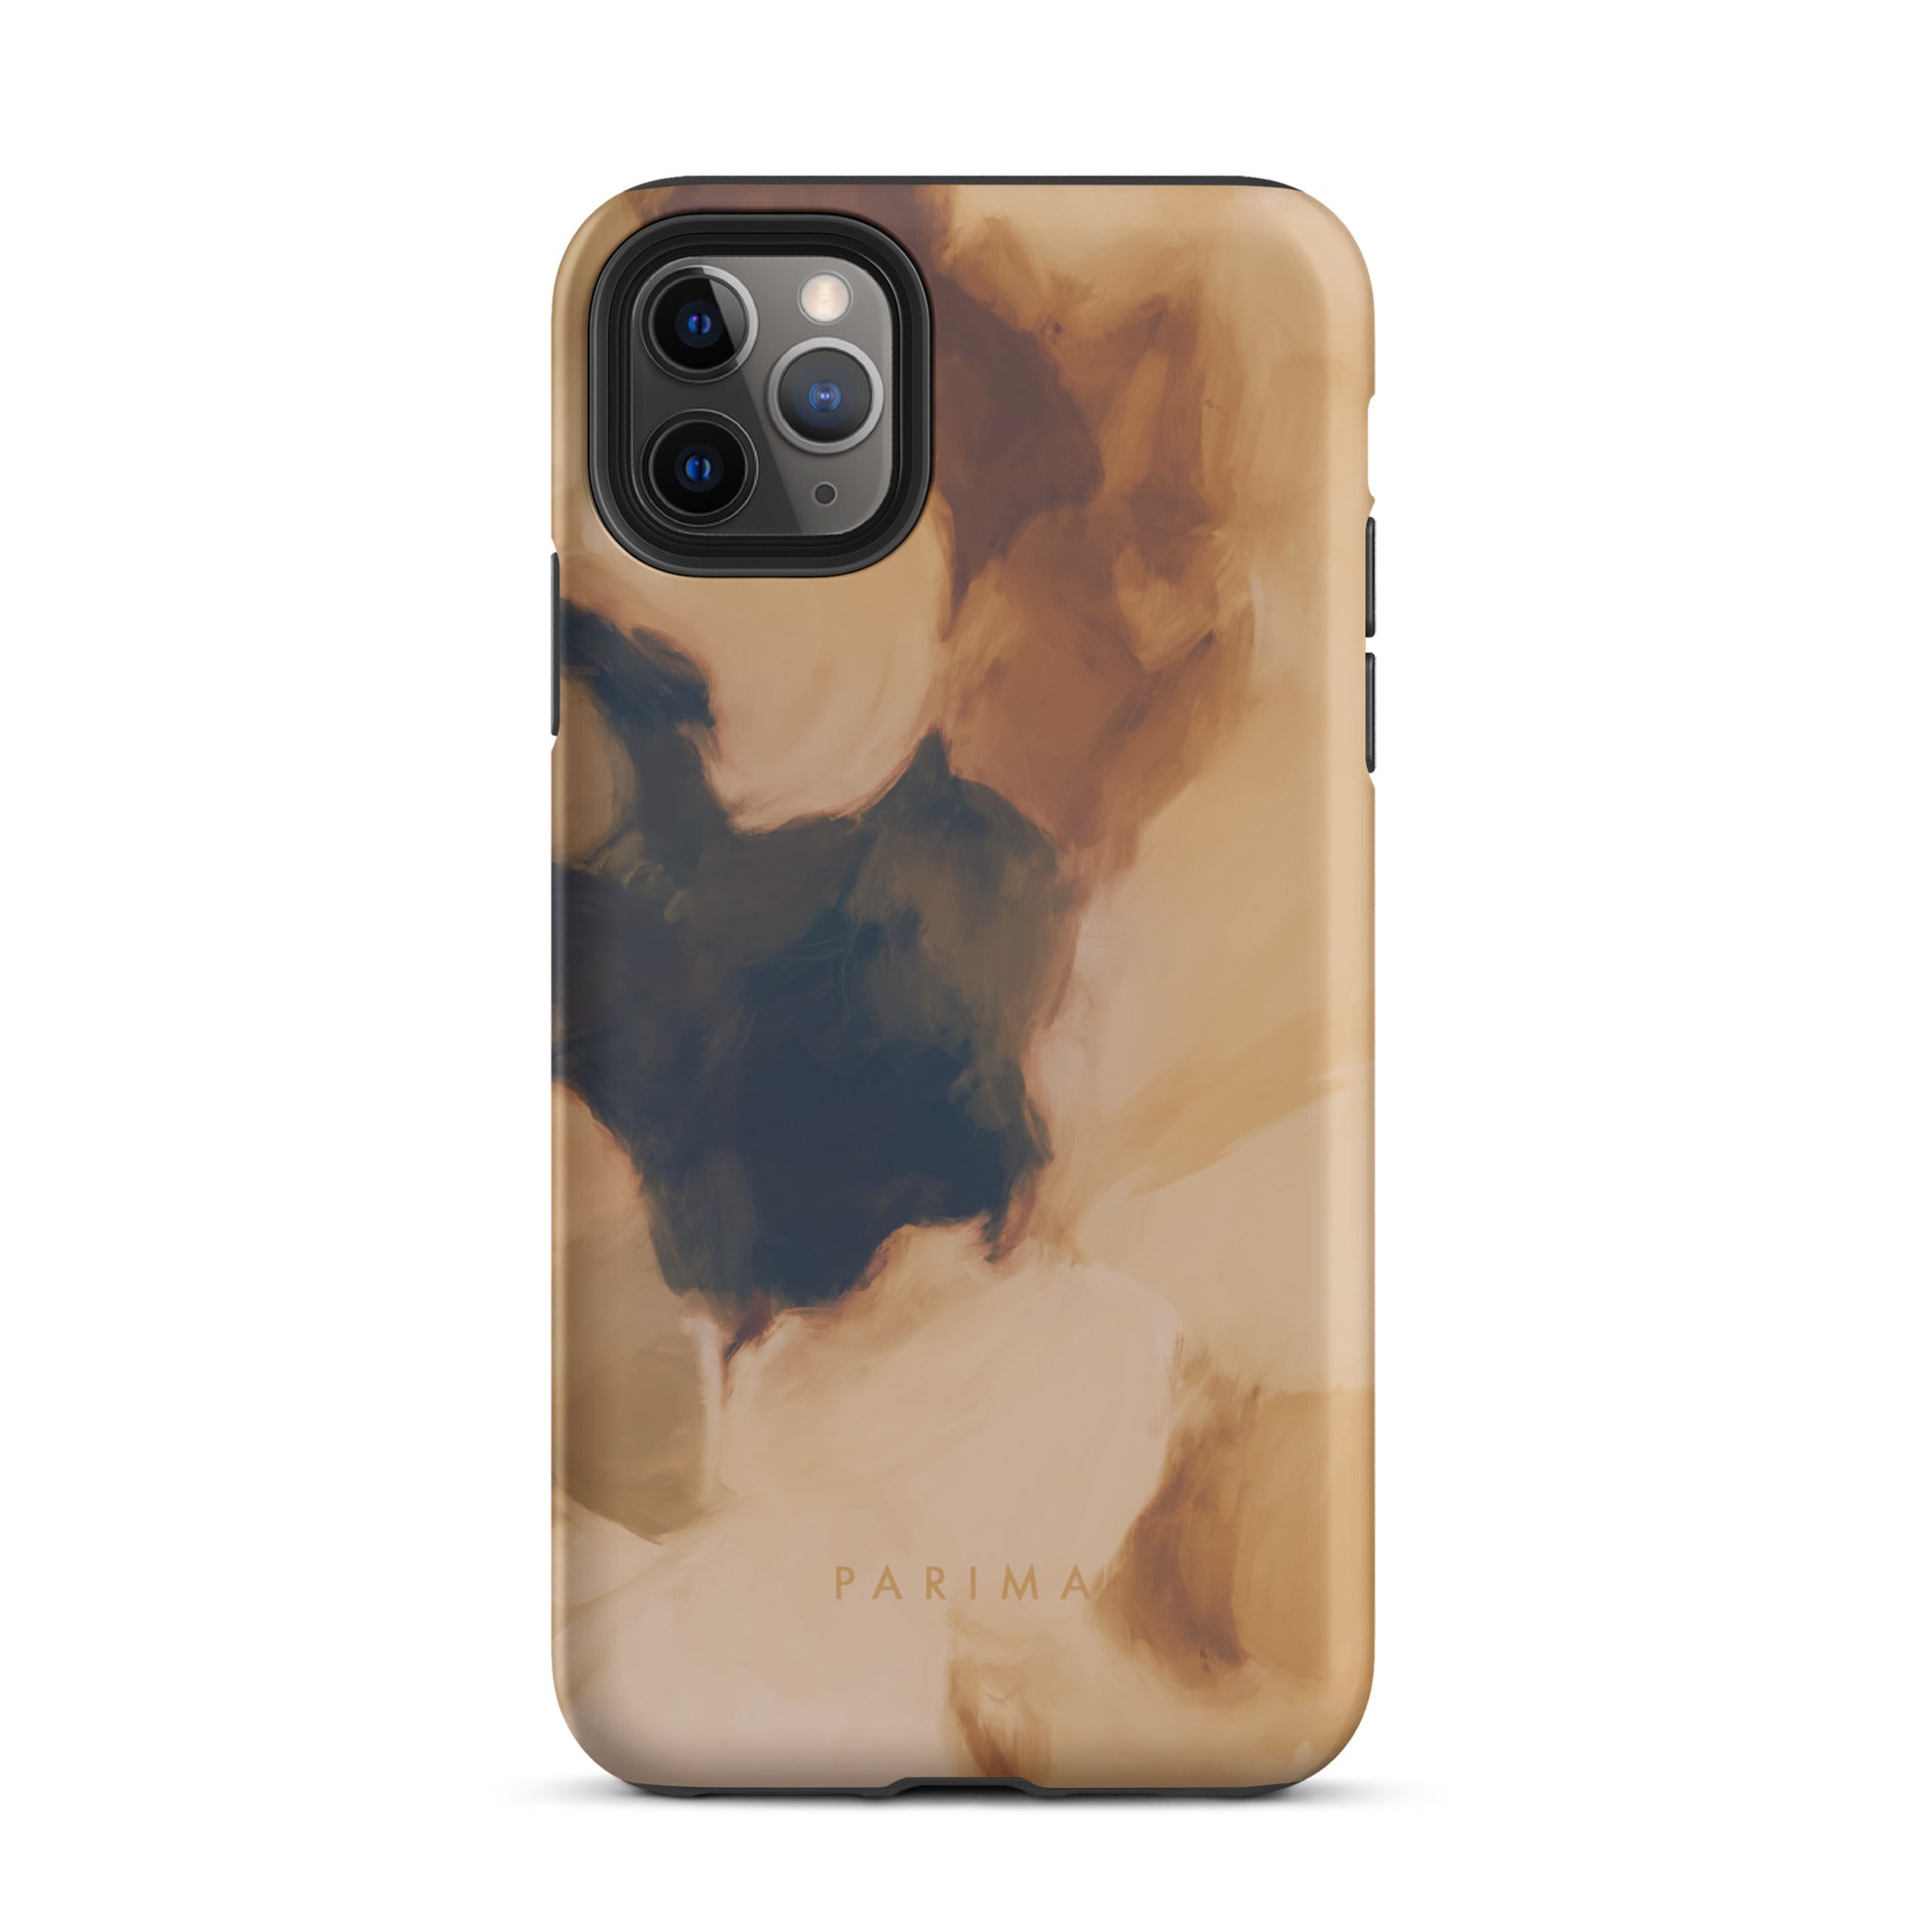 Clay, brown and tan color abstract art on iPhone 11 Pro Max tough case by Parima Studio